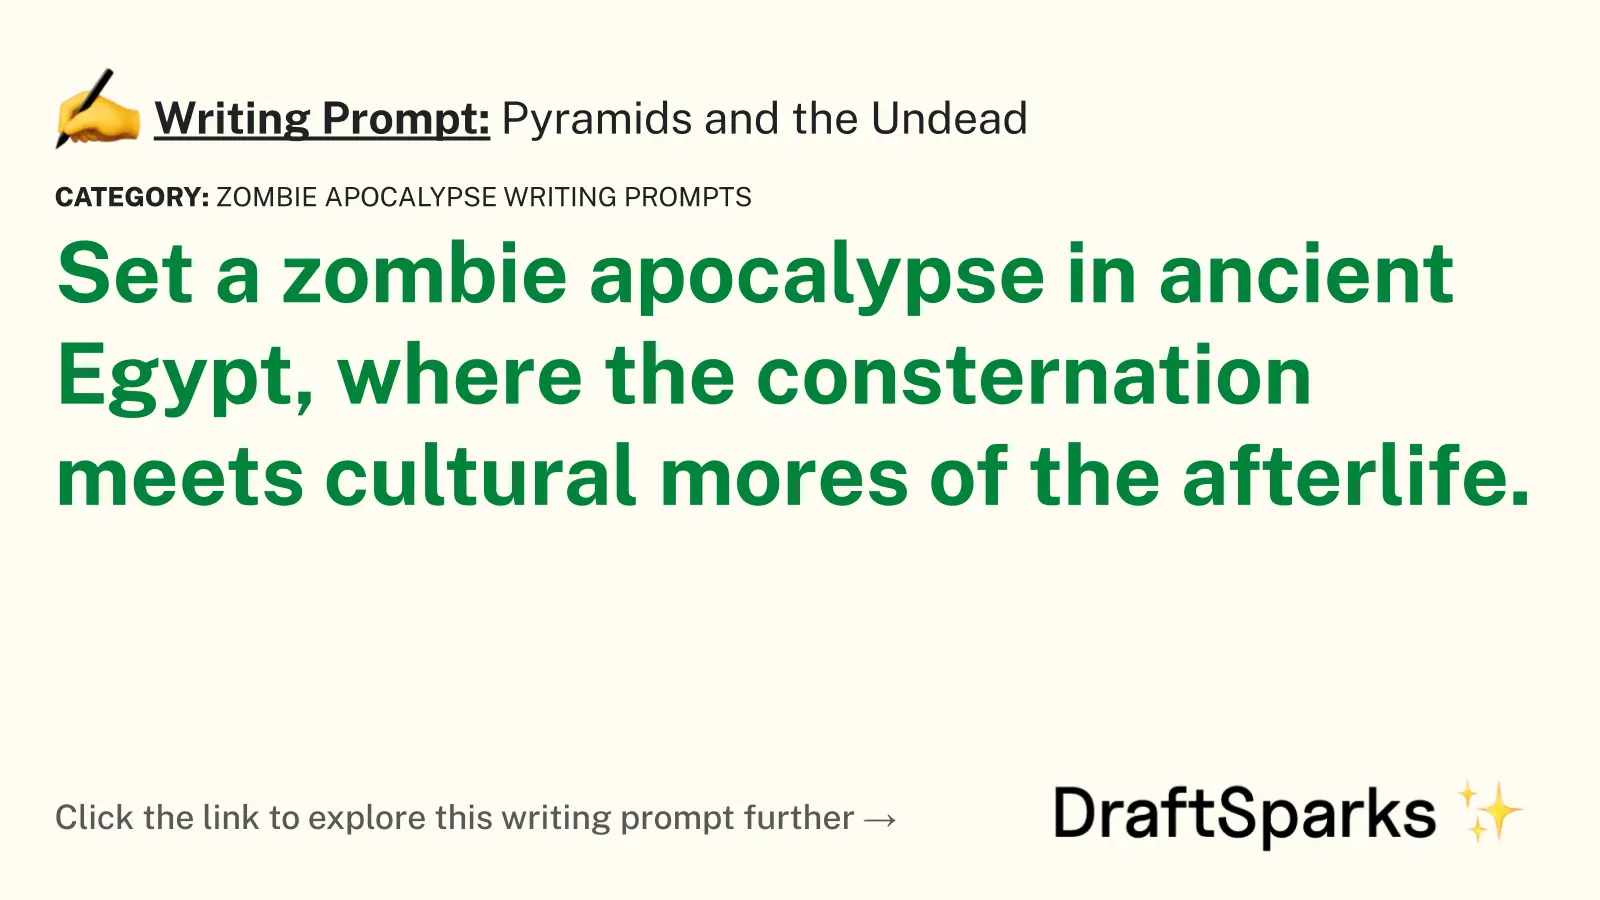 Pyramids and the Undead